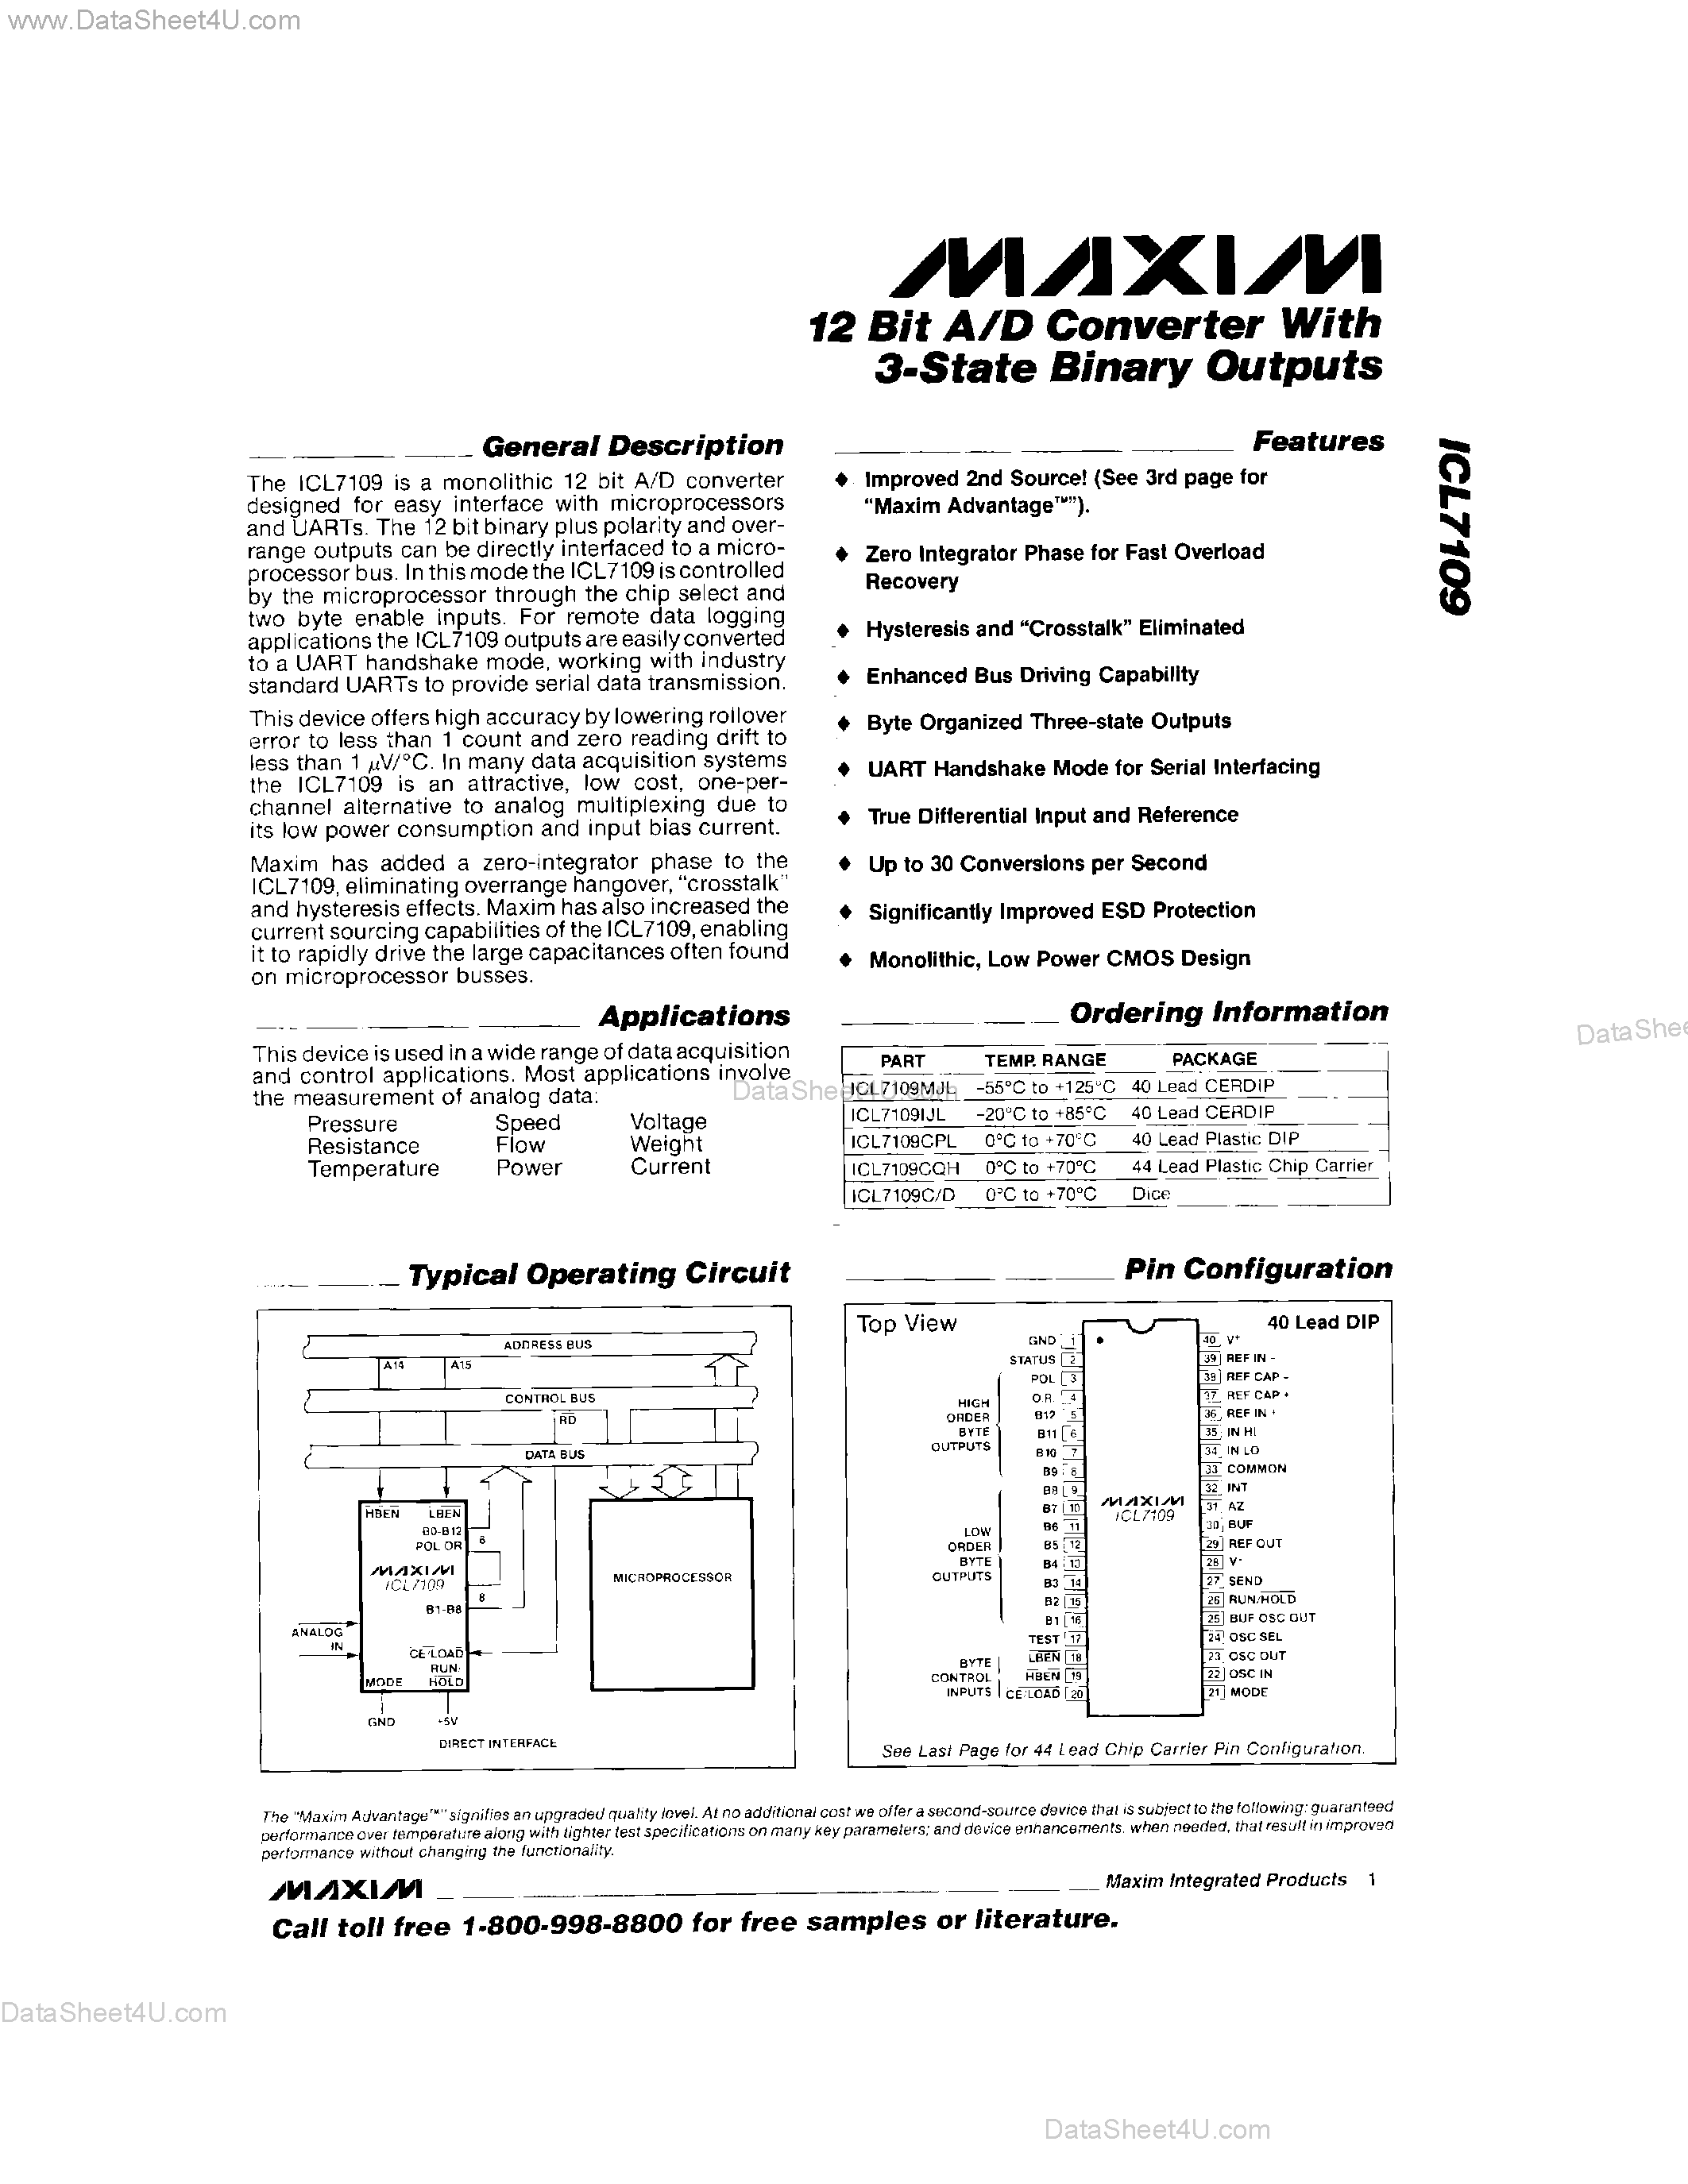 Datasheet ICL7109C/D - 12 Bit A/D Converter With 3-State Binary Outputs page 1